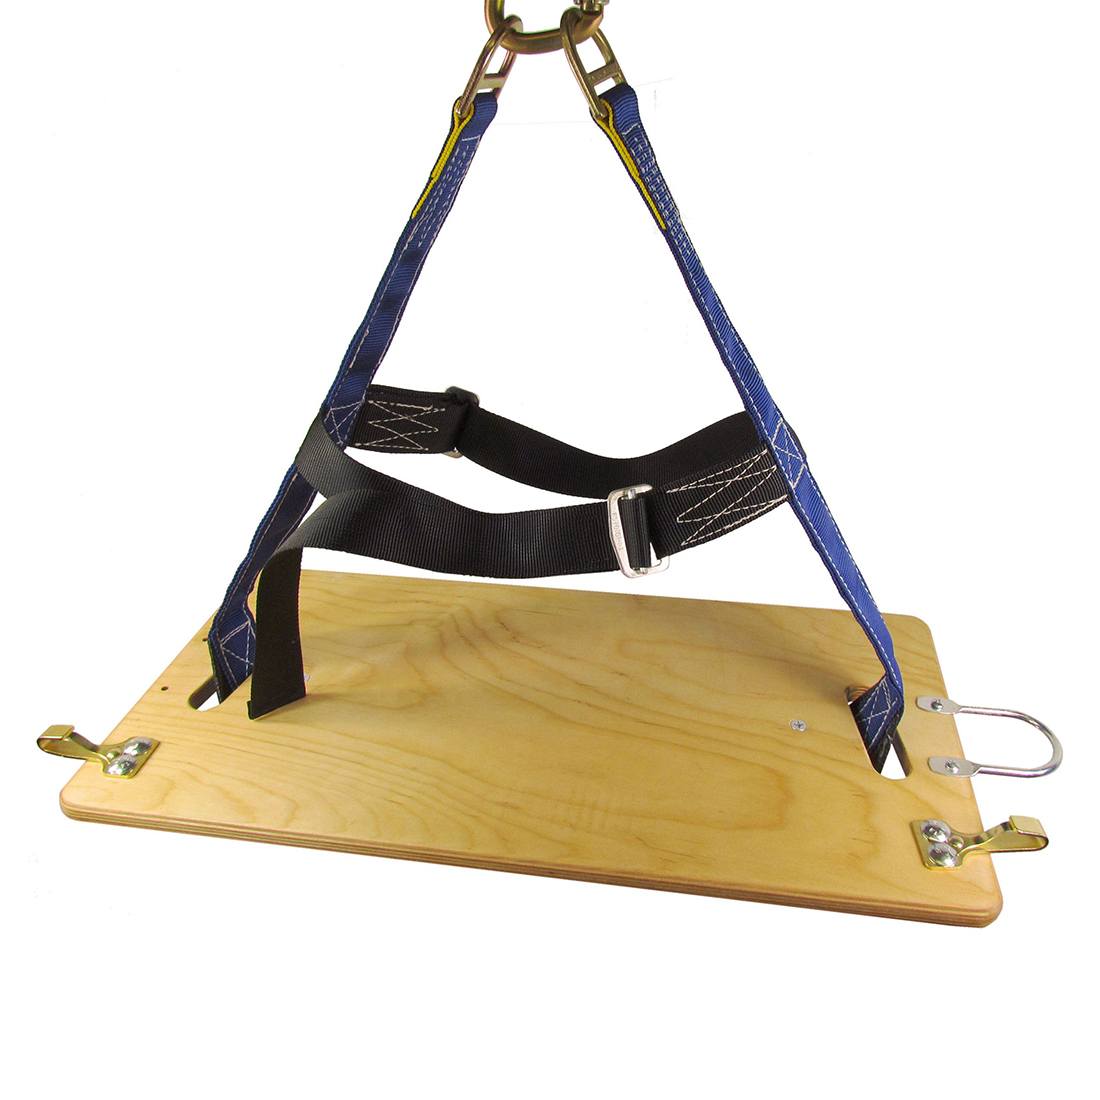 Sky Genie 2 Point Suspension Chair - with Waist Harness - Left Angle Front View